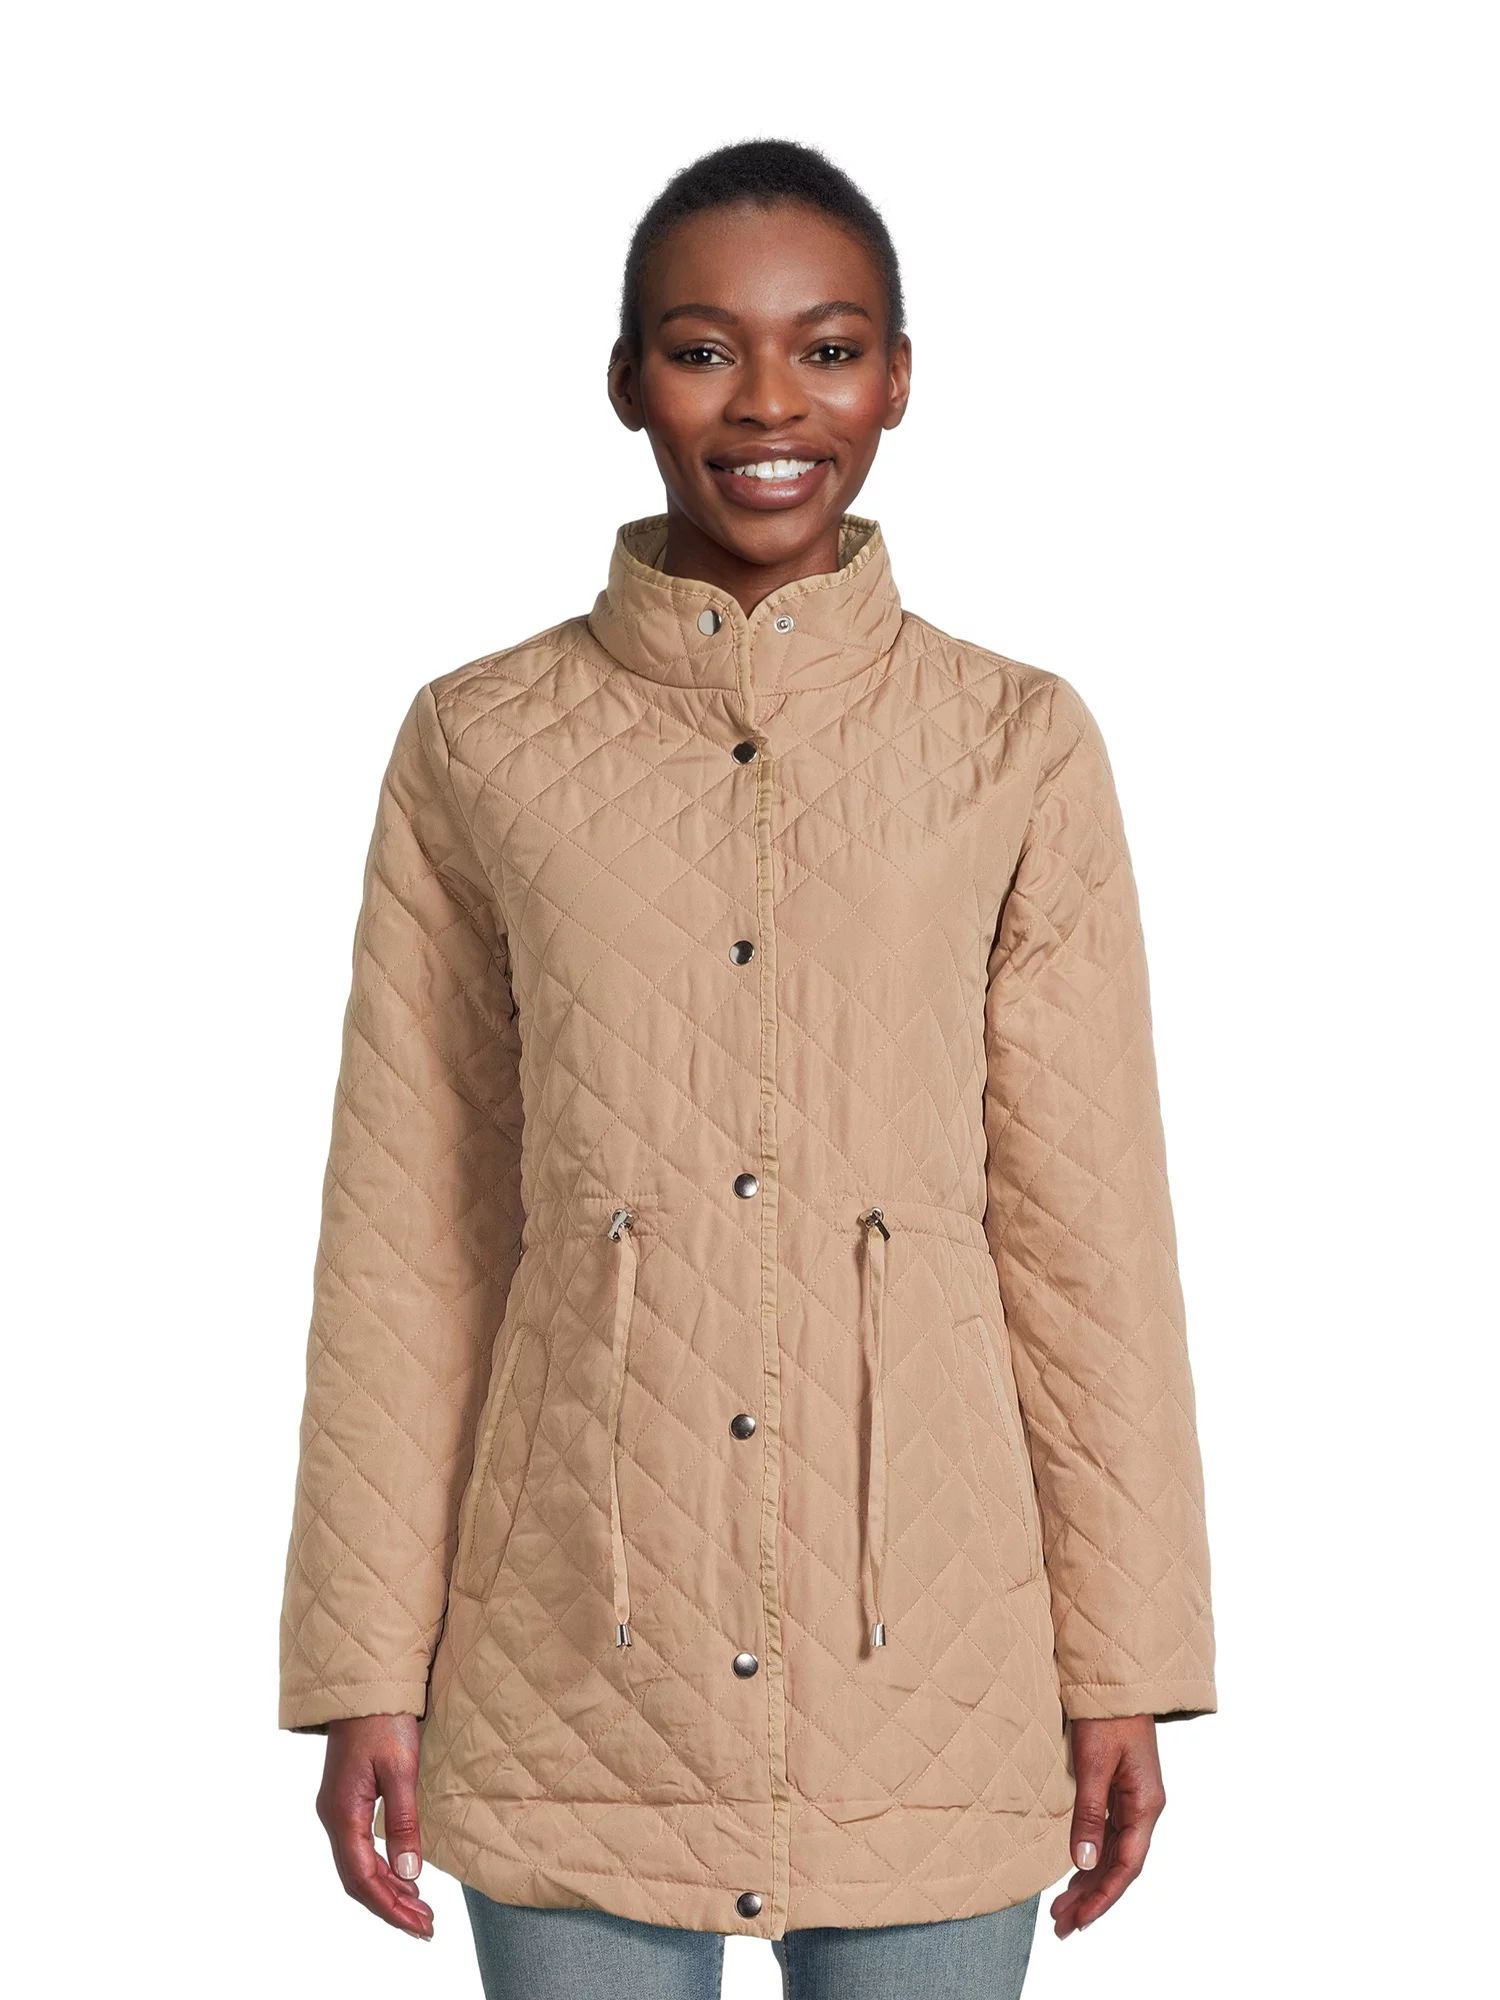 Jason Maxwell Women’s and Women's Plus Midweight Quilted Jacket | Walmart (US)